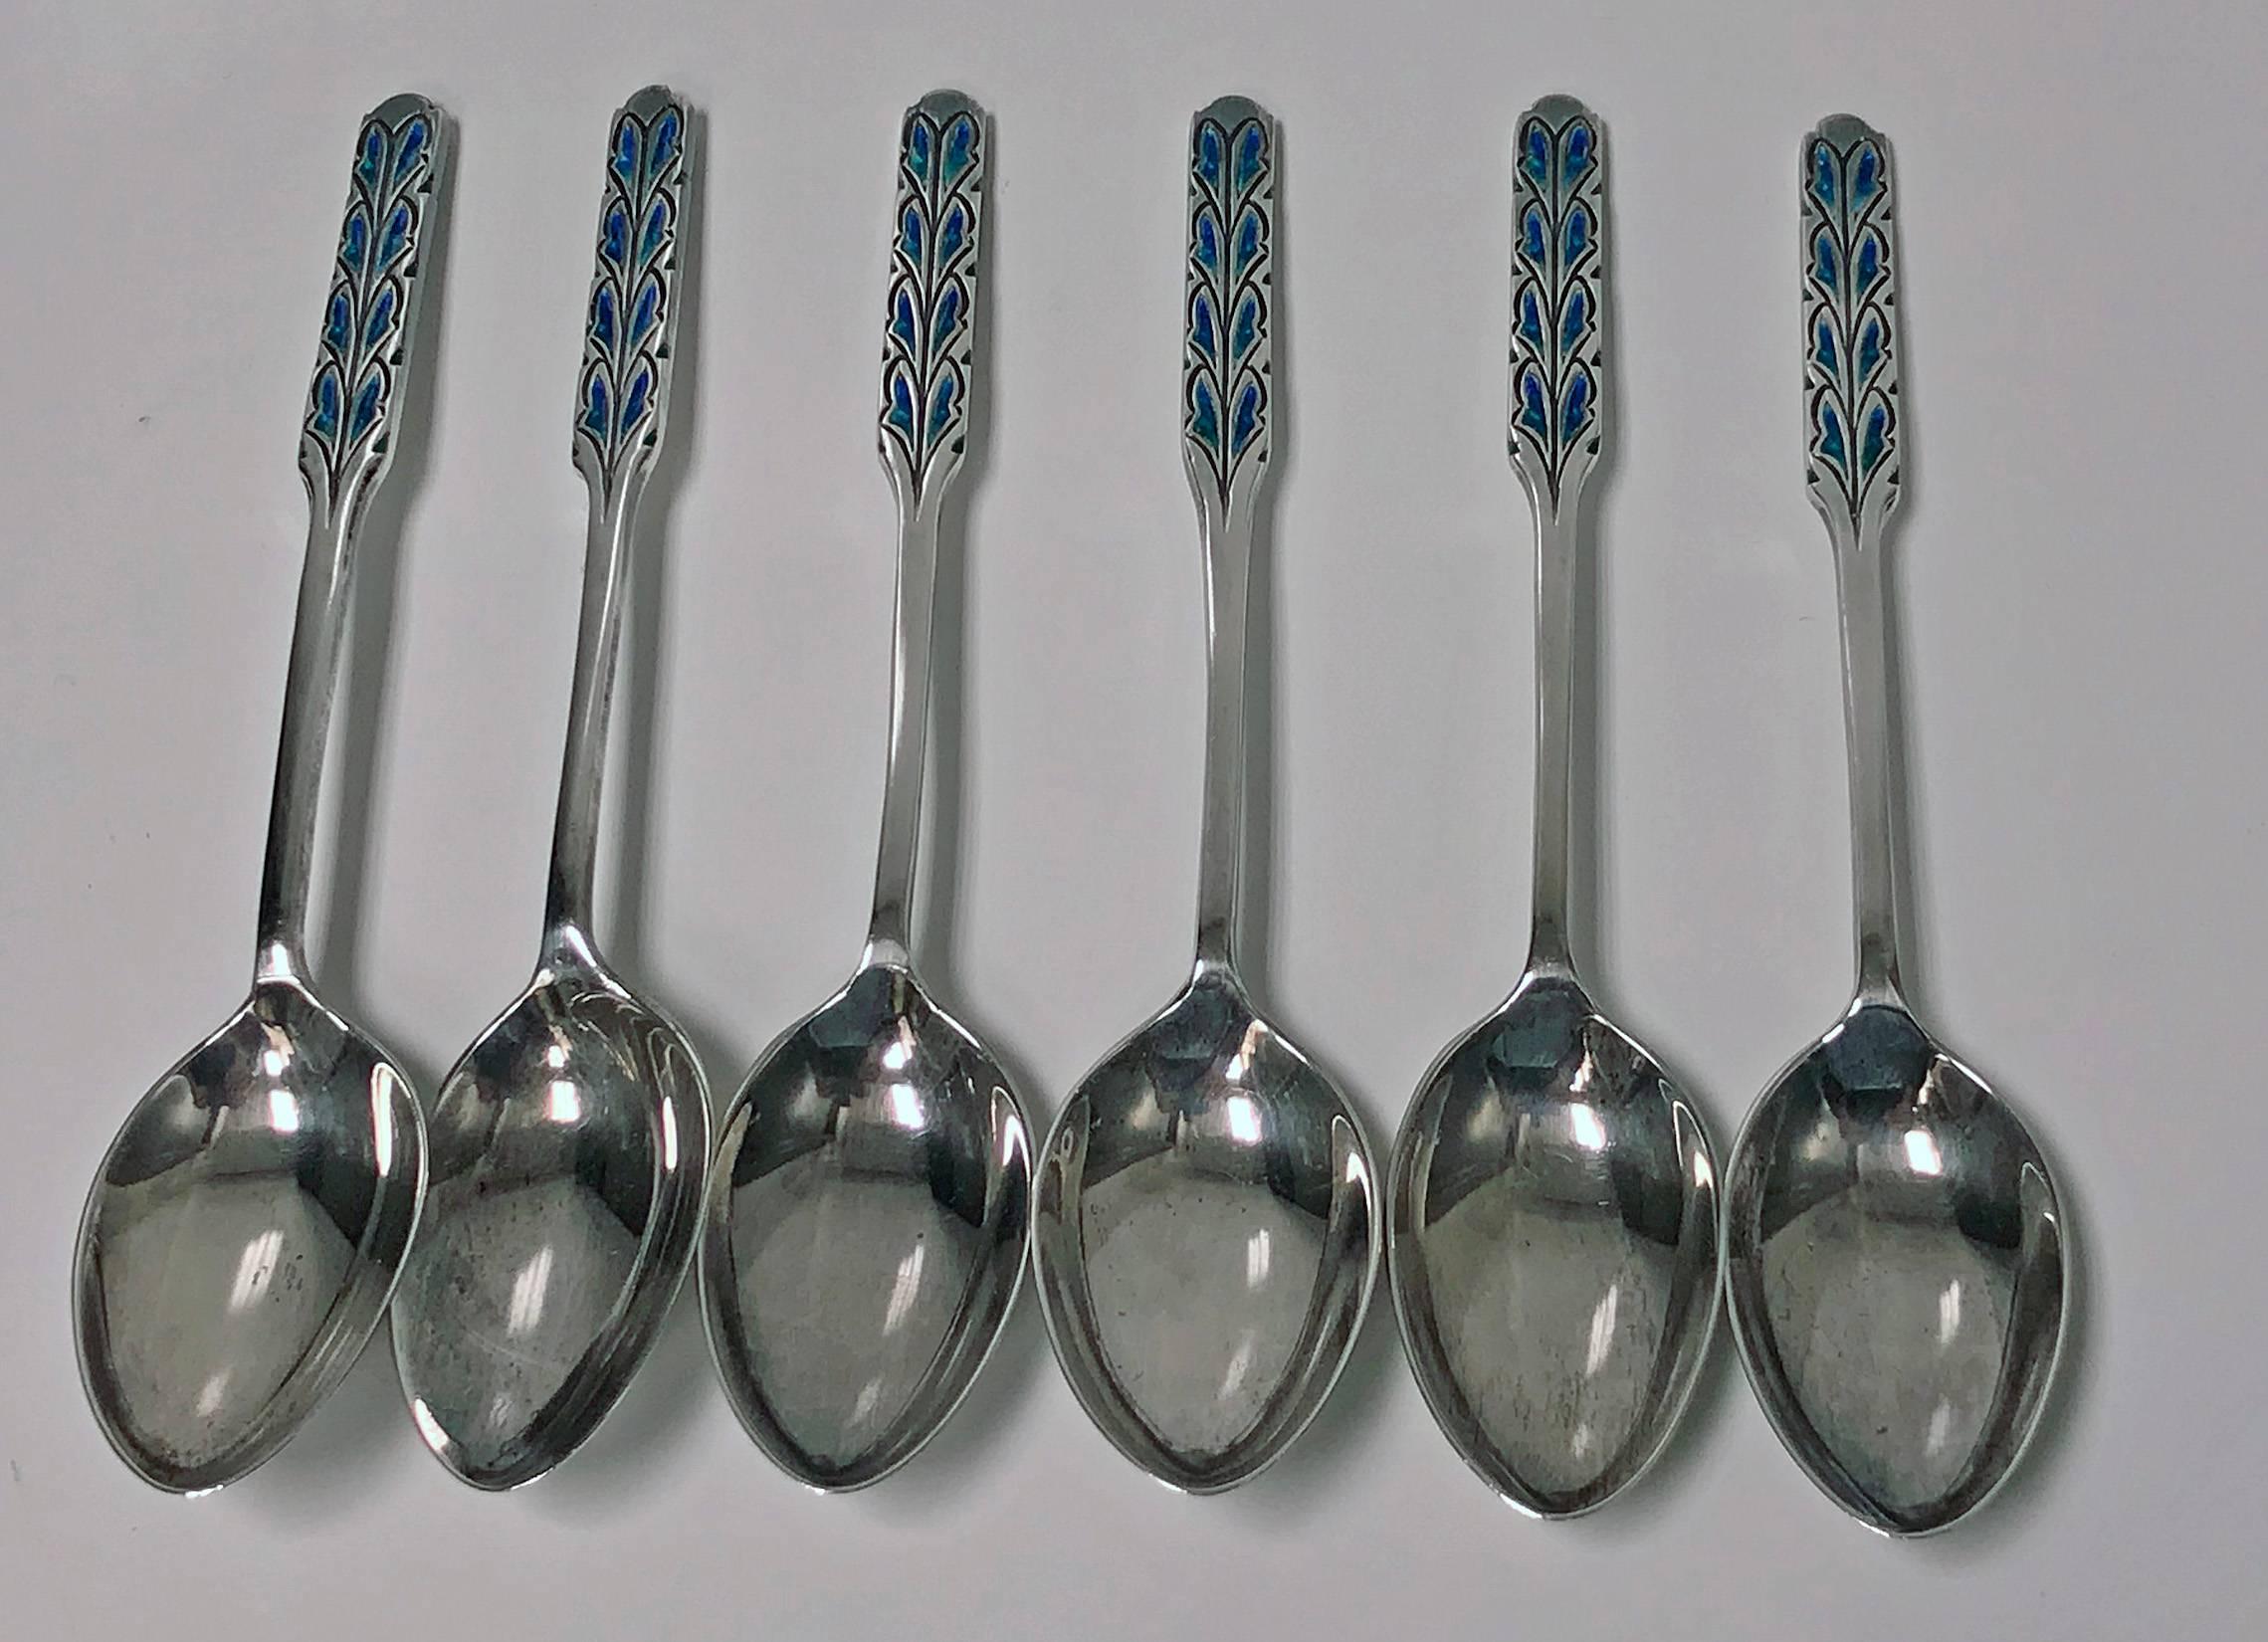 Set of Liberty and Co Enamel Sterling Silver Spoons, Birmingham 1925, fitted box. The six spoons all with enamel handles of varied turquoise color. Length: 4.5 inches. Total Item Weight: 70.82 grams. Original Box for G.L Connell Ltd Retailers for